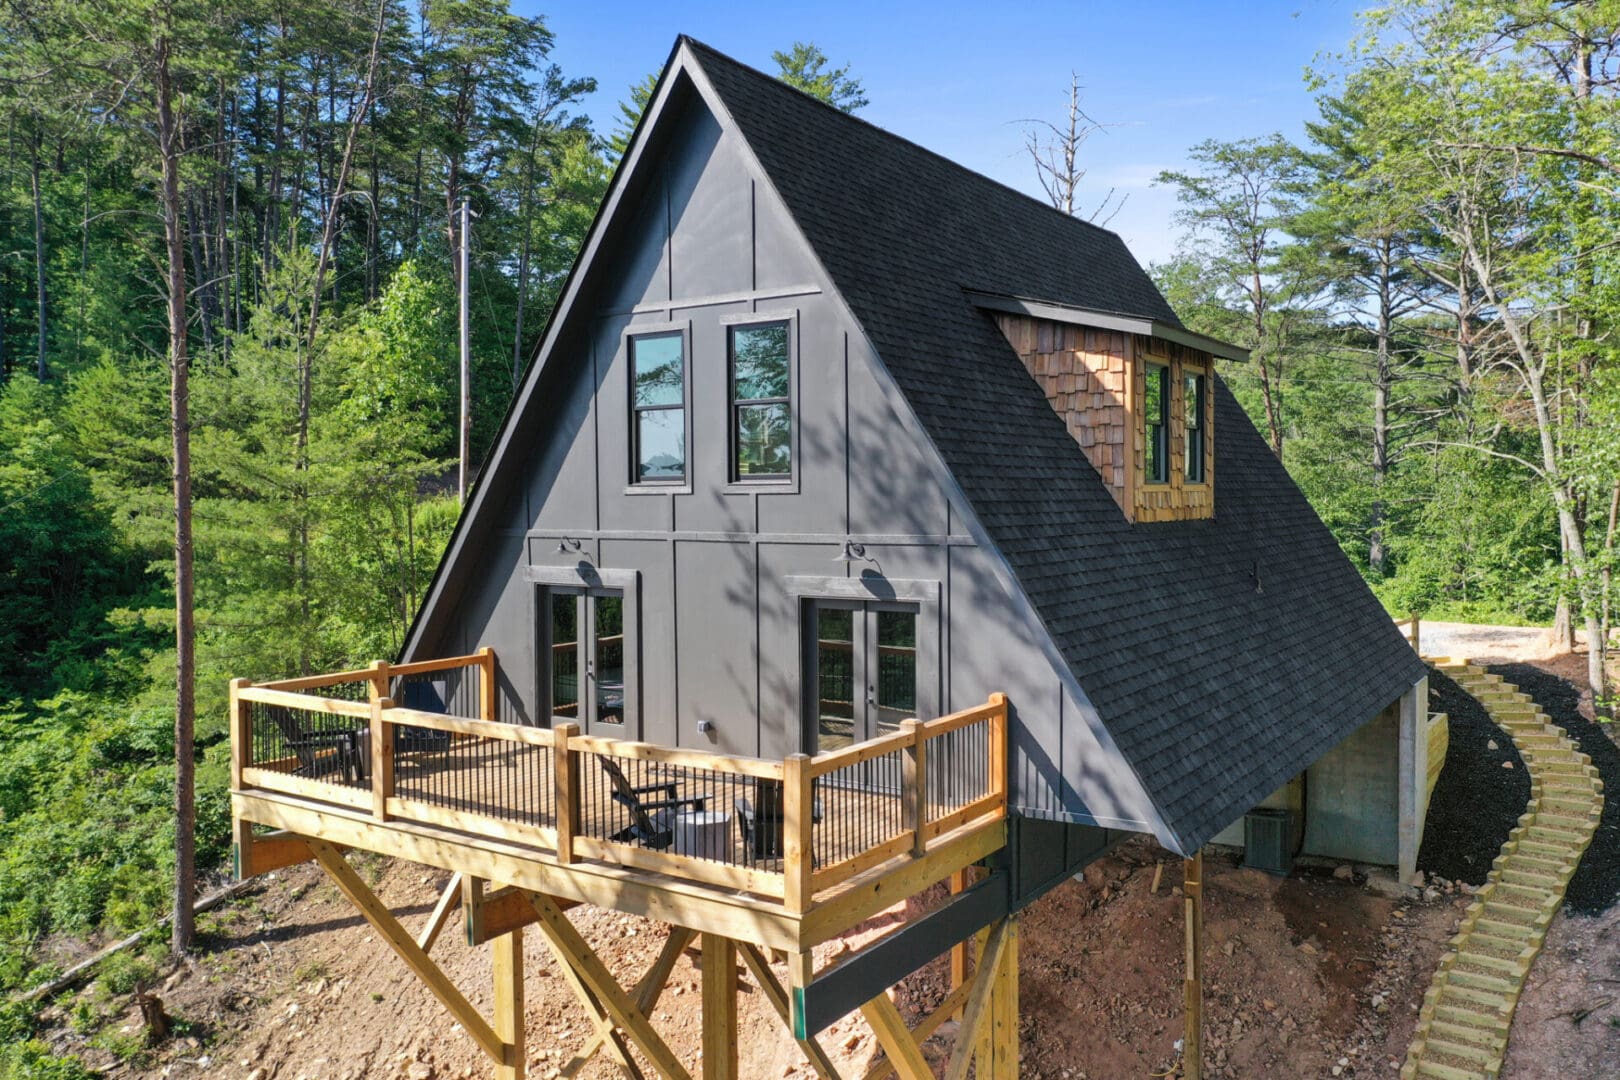 Architectural Design services were employed to create a captivating cabin in the woods, boasting a thoughtful layout complete with a deck and stairs.